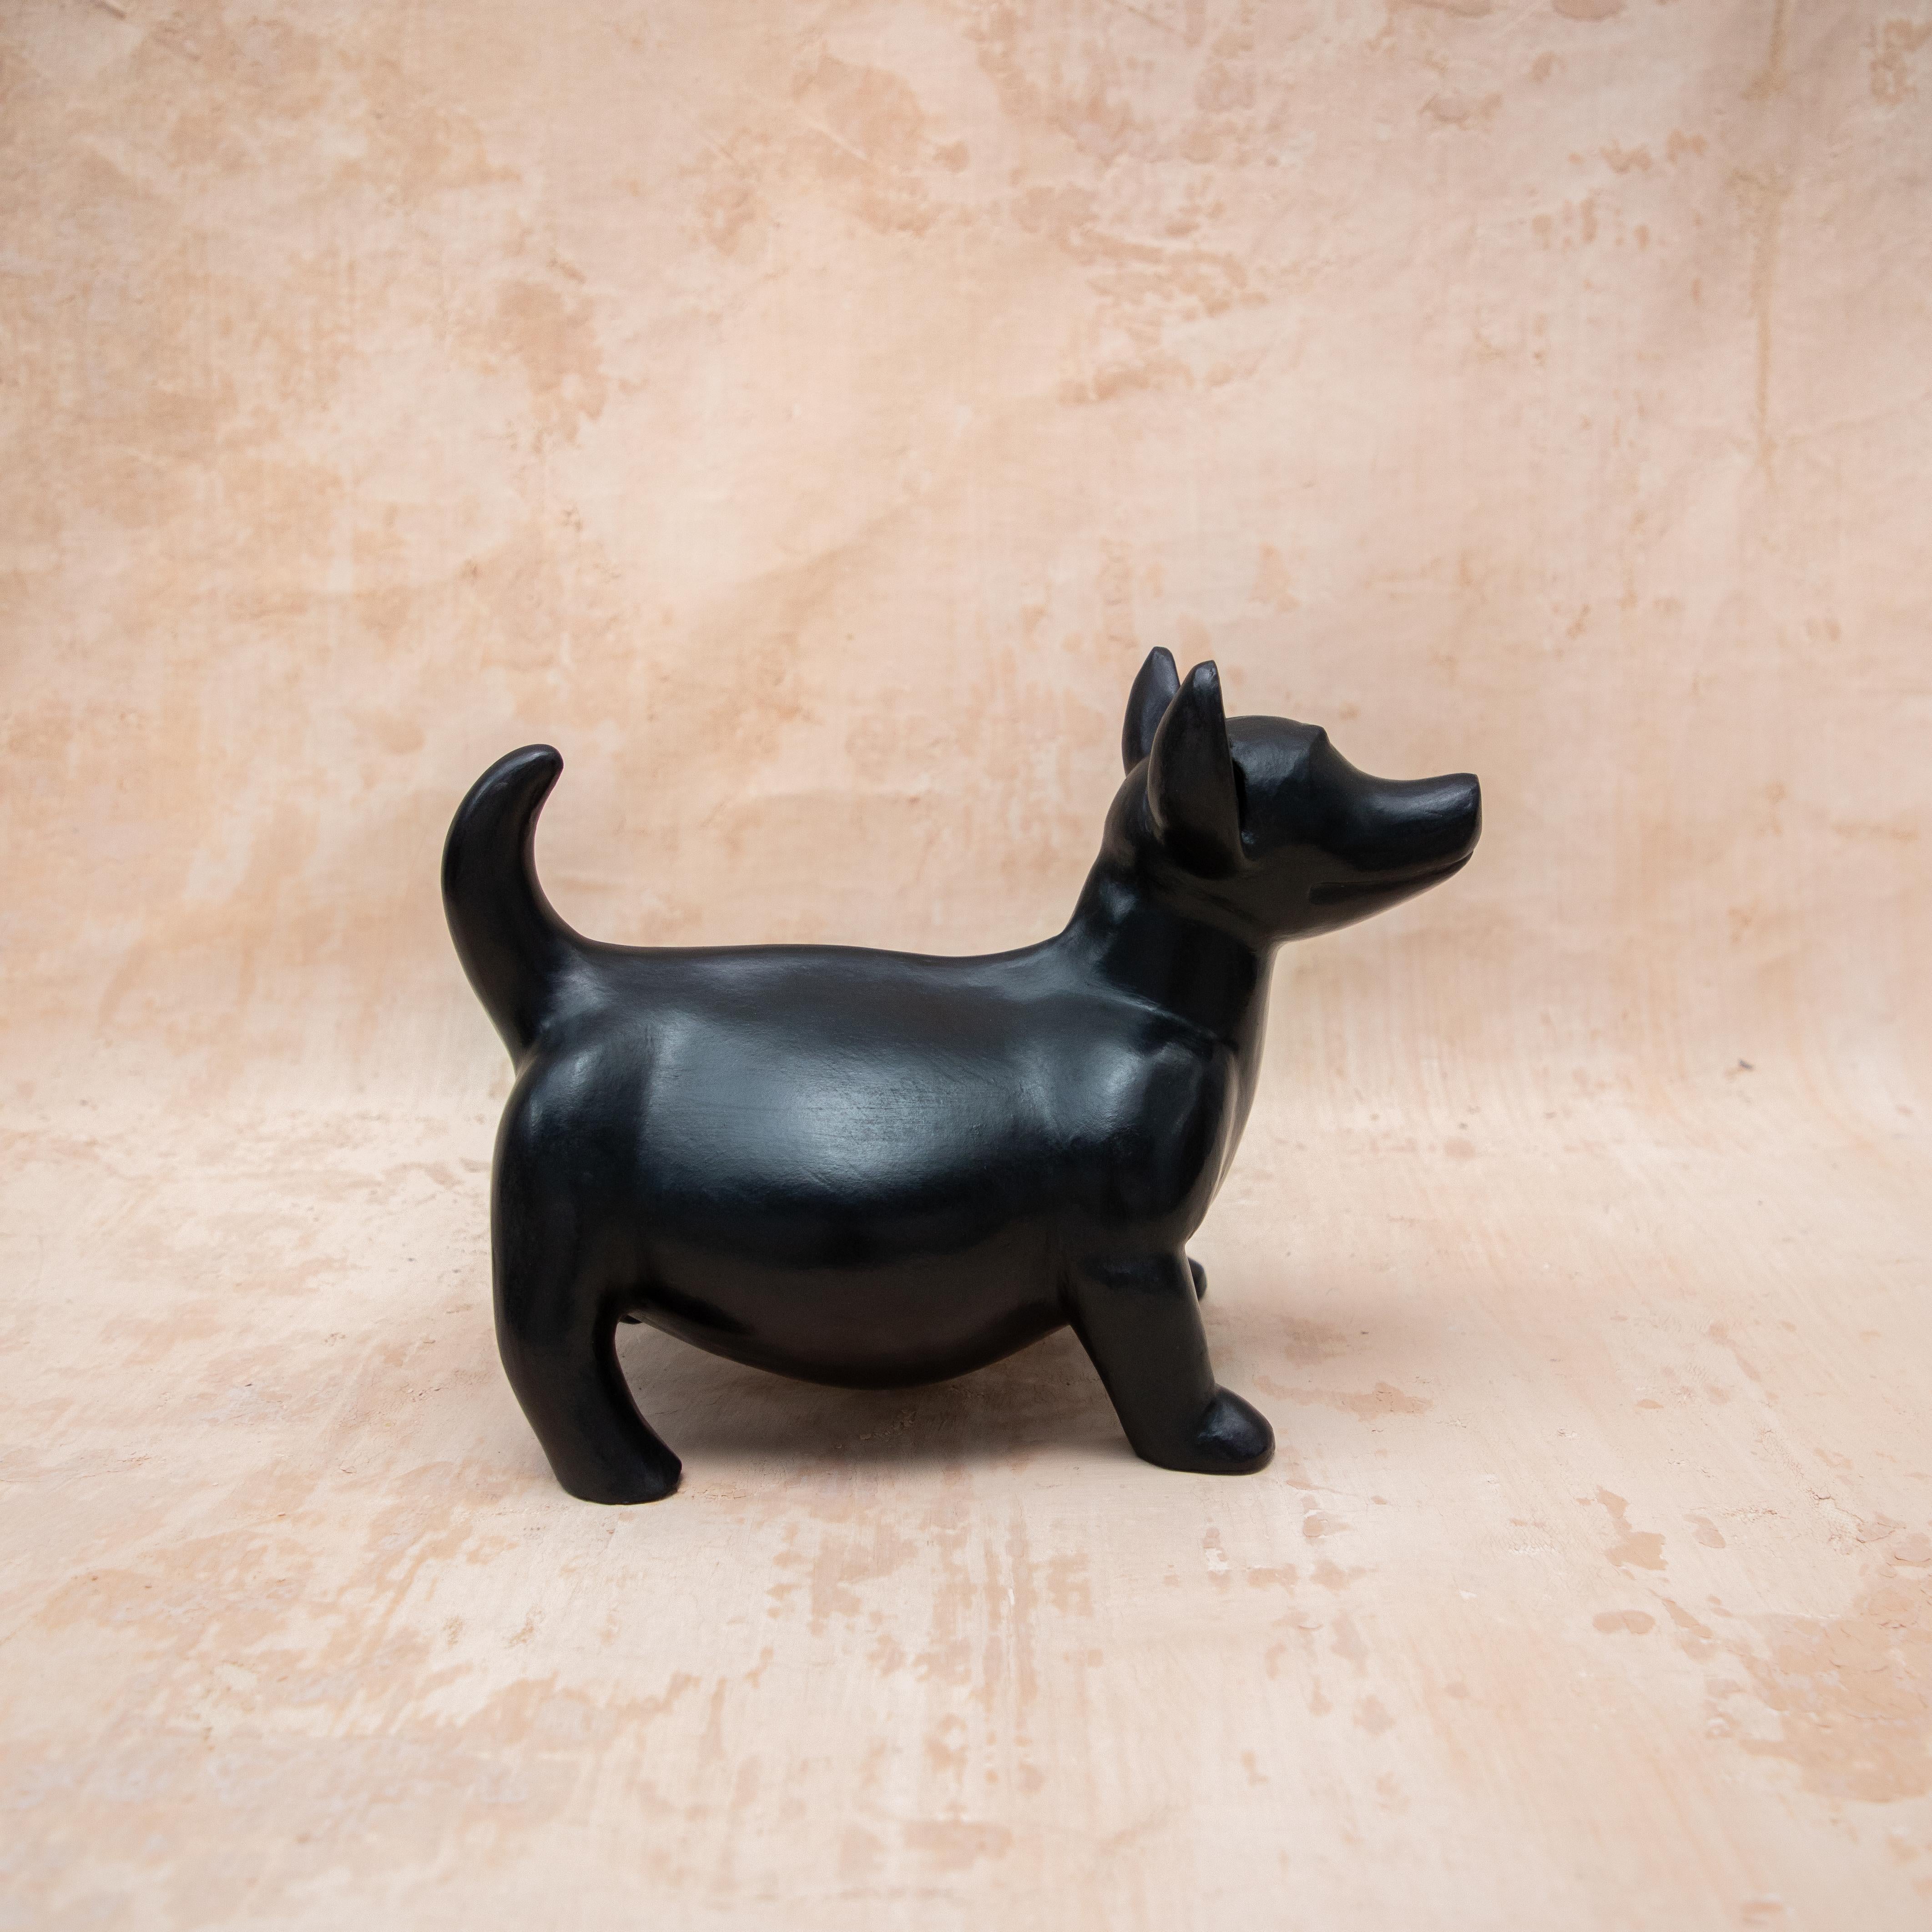 Standing Xolo by Onora
Dimensions: W 33.7 x H 25 cm
Materials: Clay

Xolo, short for xoloitzcuintle is a breed of dog that has long been a culturally-significant symbol in Mexico. These dogs were considered sacred by the Aztecs and the Mayans,